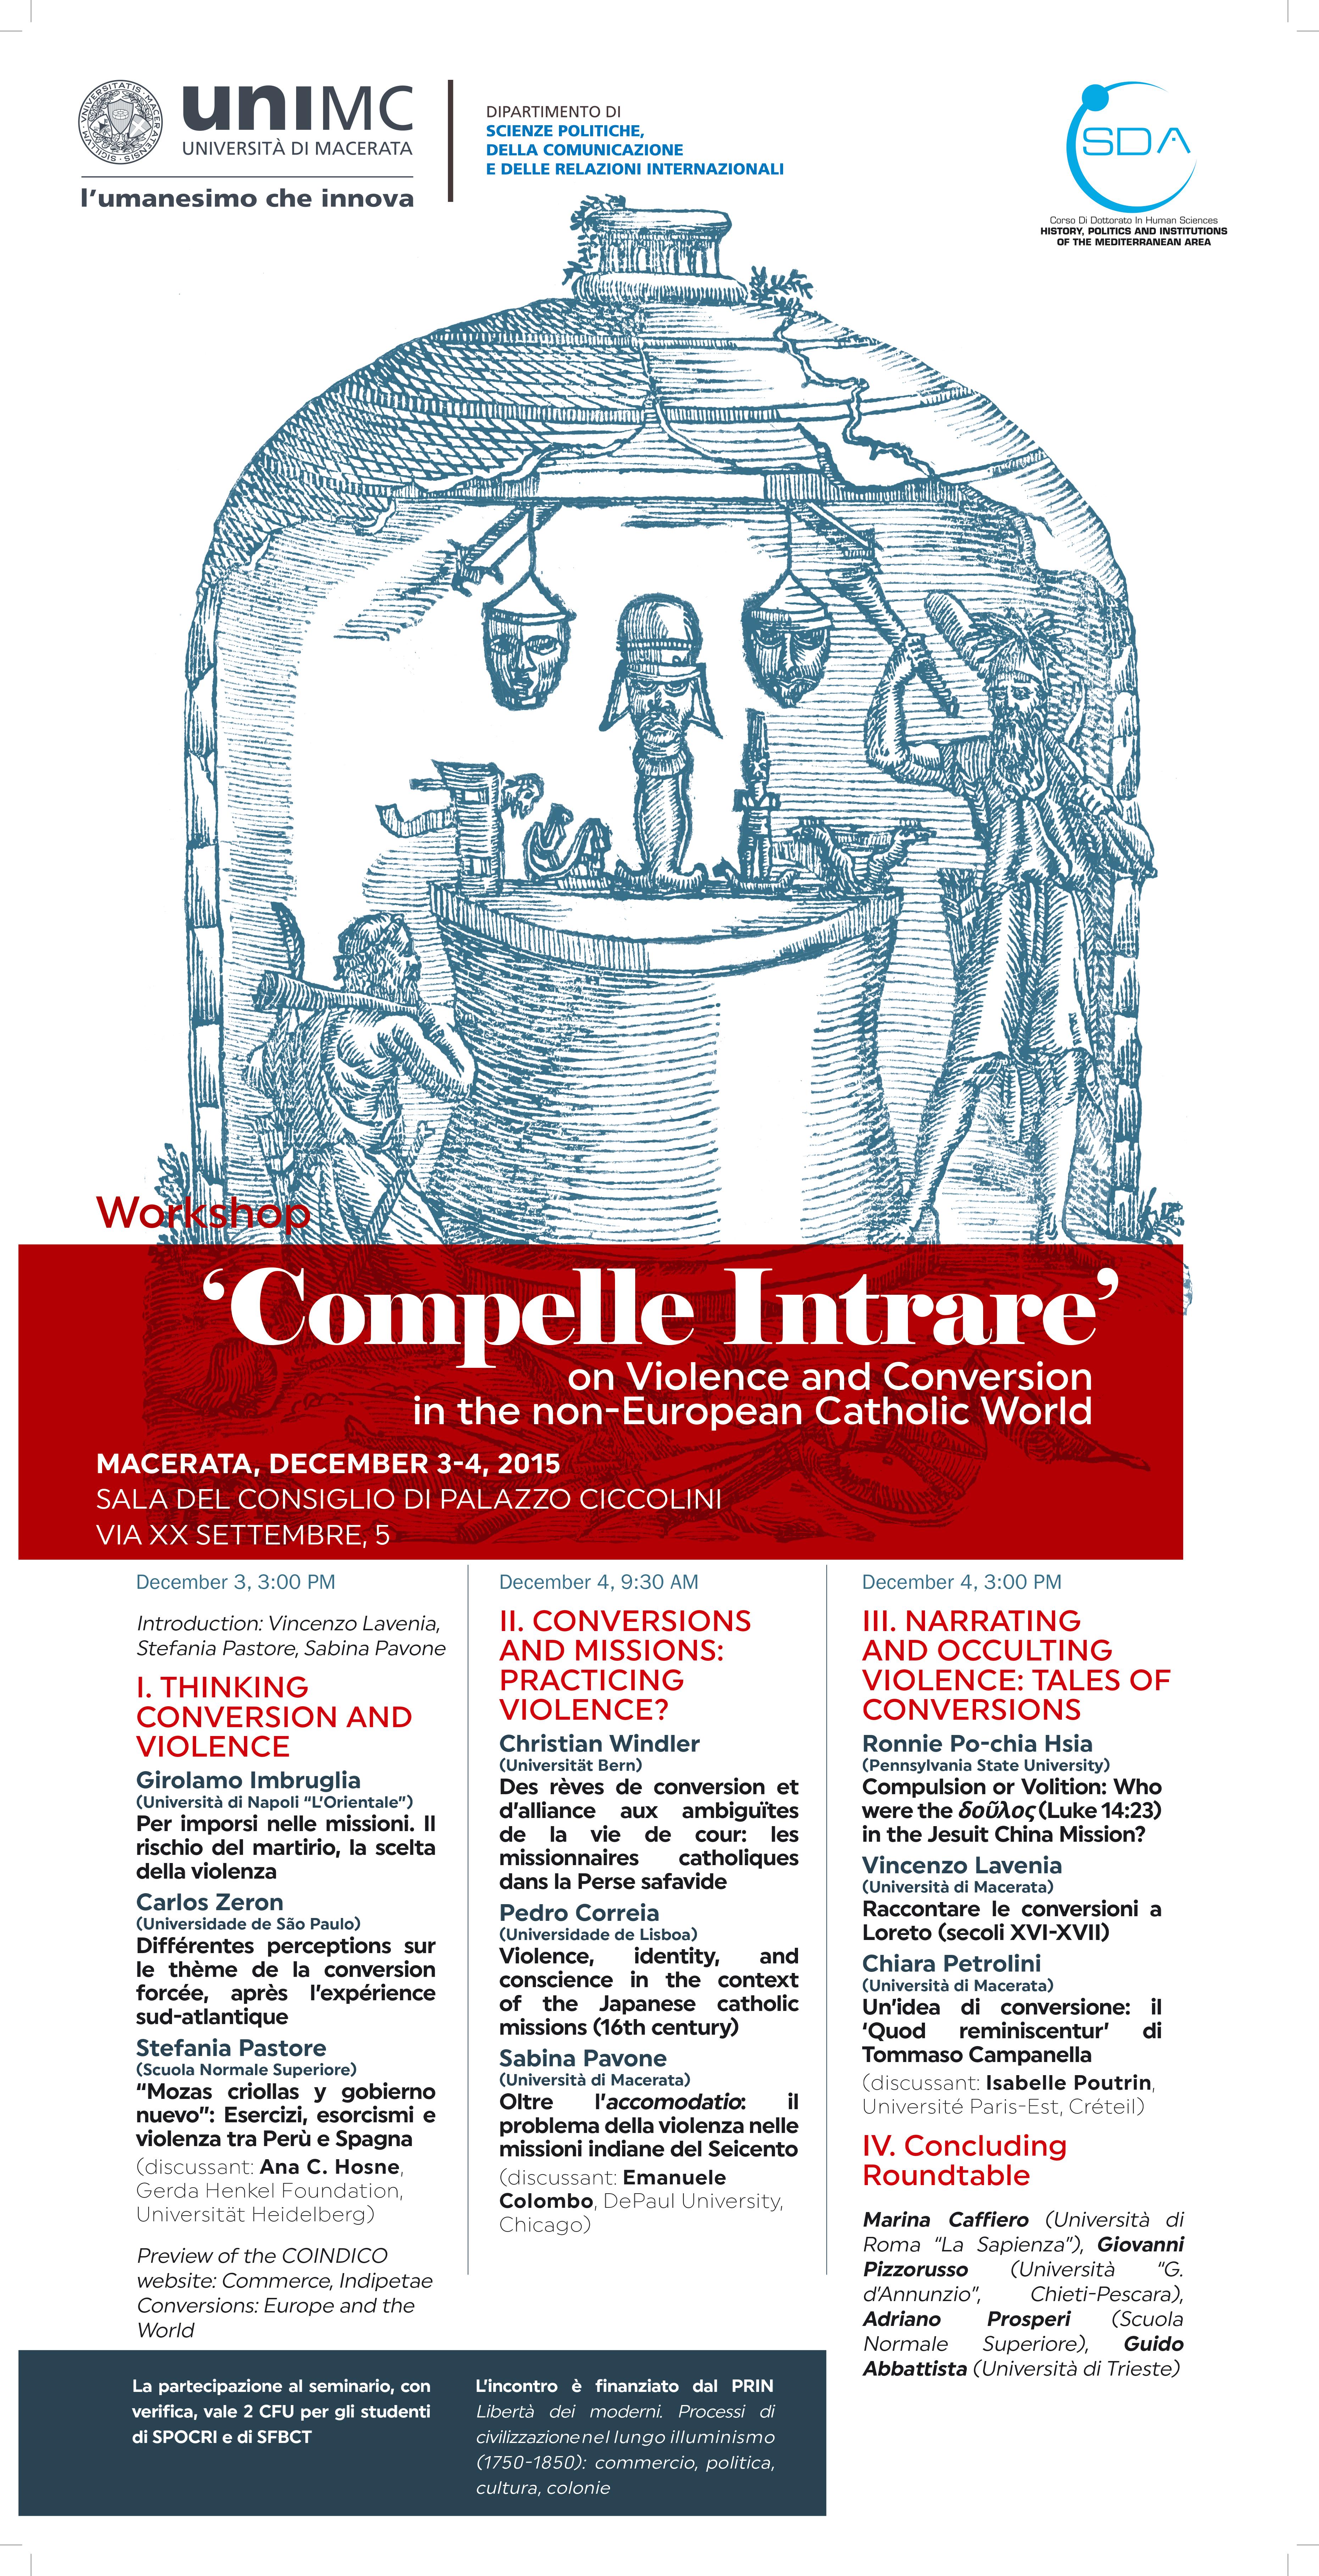 WORKSHOP. "Compelle Intrare" on Violence and Conversion in the non-European Catholic World